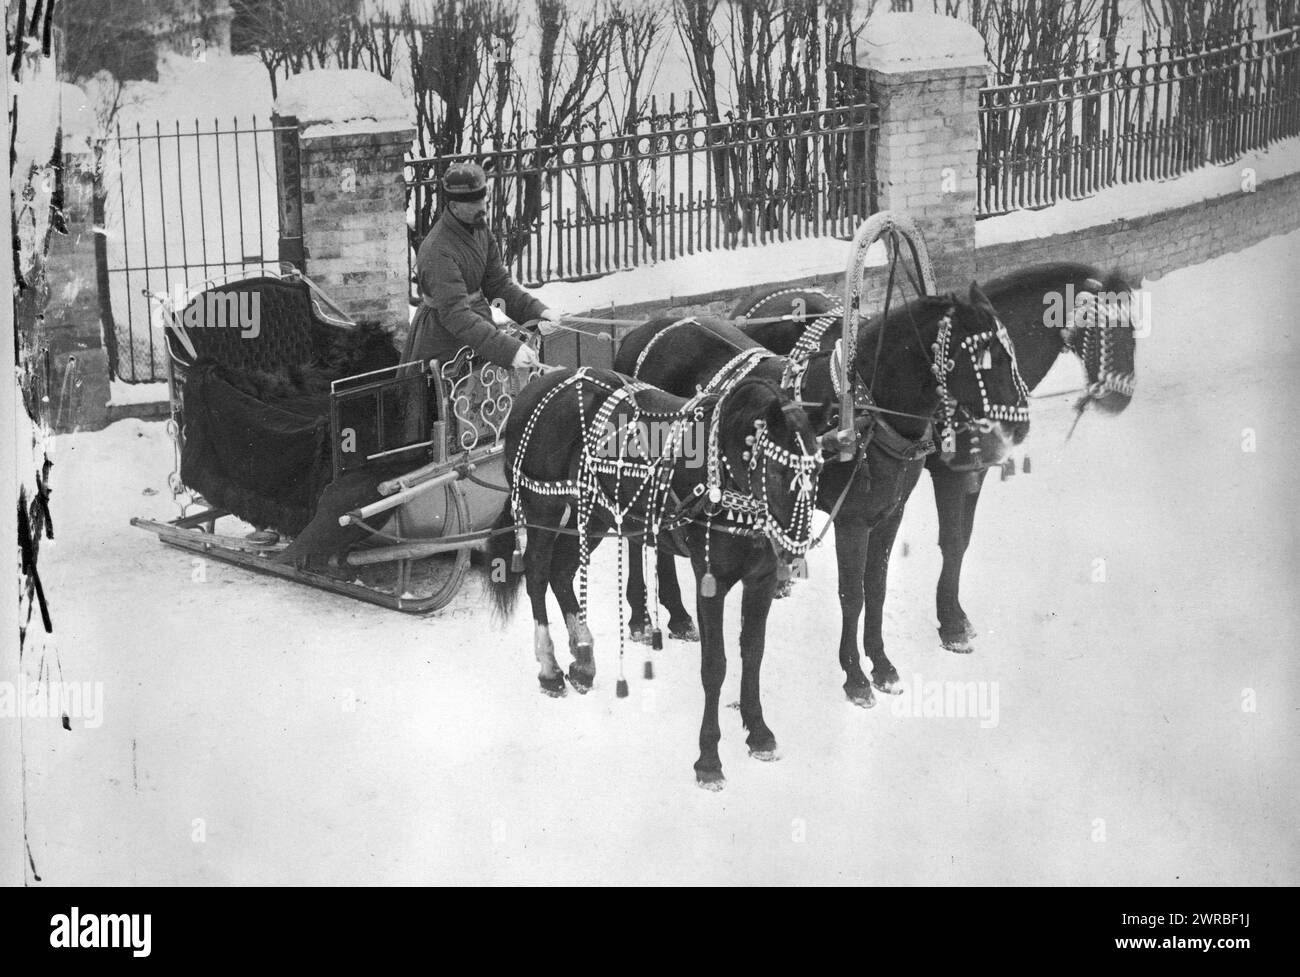 Horse drawn sledge, in Russia, Photo shows a man standing in a troika sled, holding the rein attached to a team of three horses., Carpenter, Frank G. (Frank George), 1855-1924, collector, between 1900 and 1923, Horse teams, Russia (Federation), 1890-1930, Photographic prints, 1900-1930., Photographic prints, 1900-1930, 1 photographic print Stock Photo